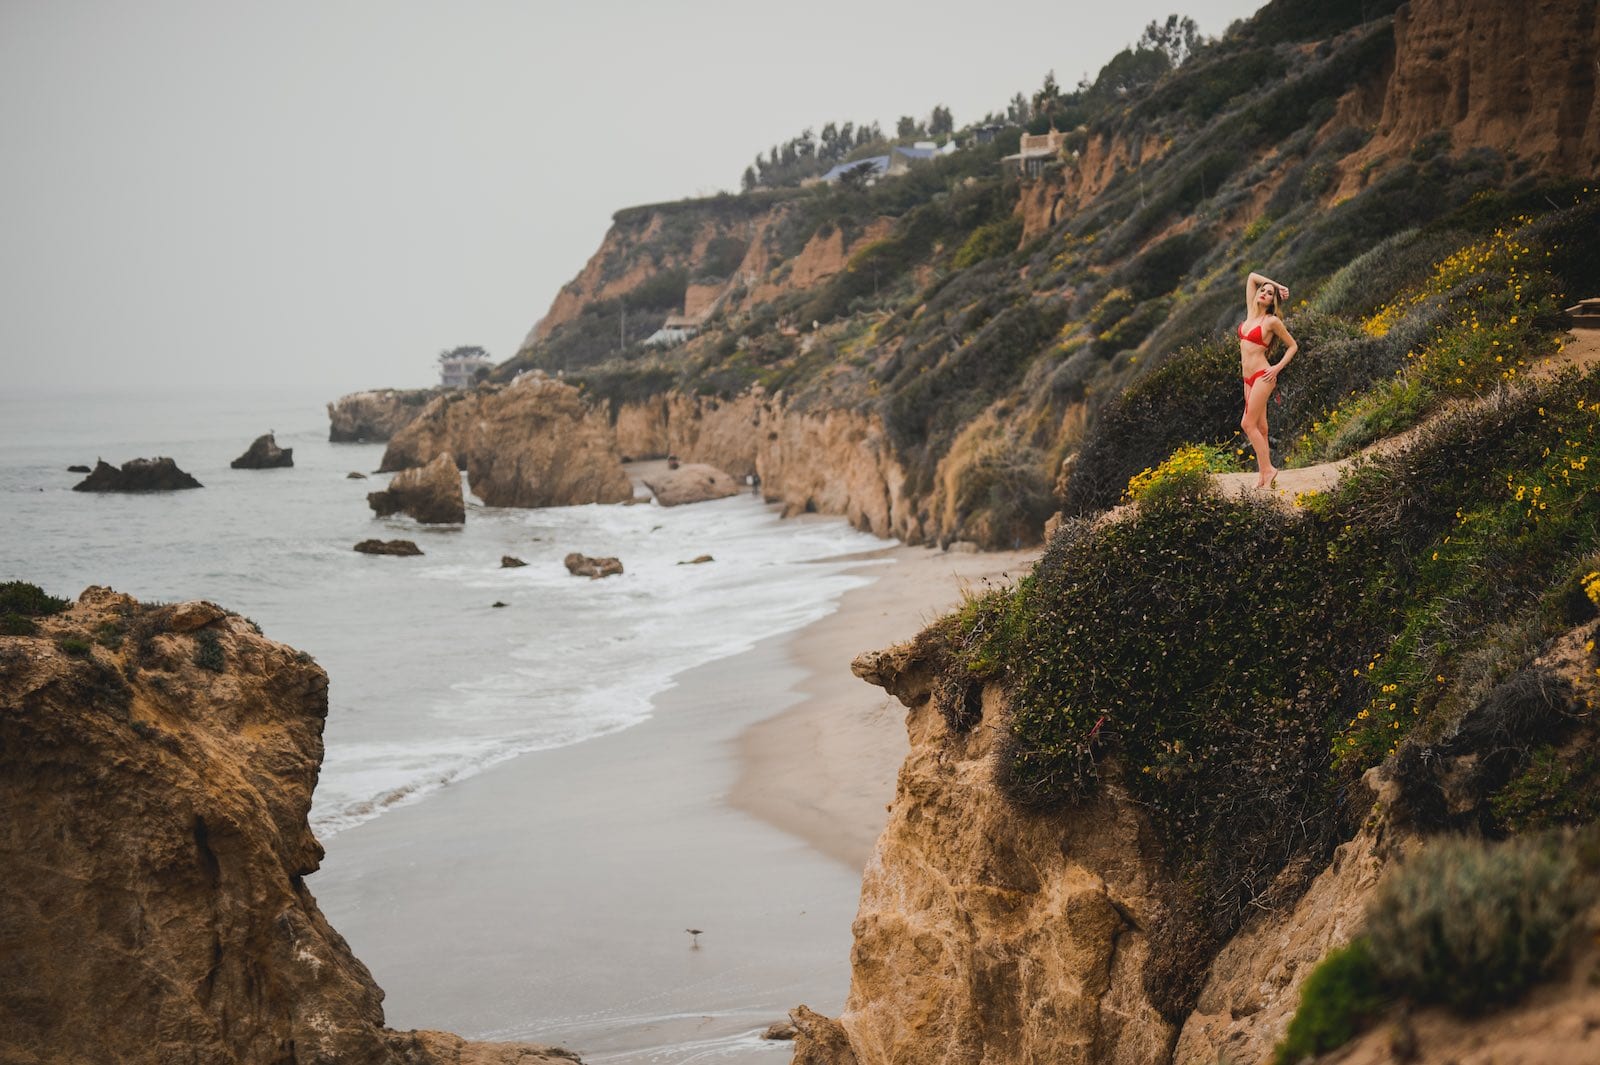 International Marketing for Montce Swim ReachKini 6 Woman with long brown hair wearing a red bikini posing for the camera from on top of a rocky outcrop by a beach